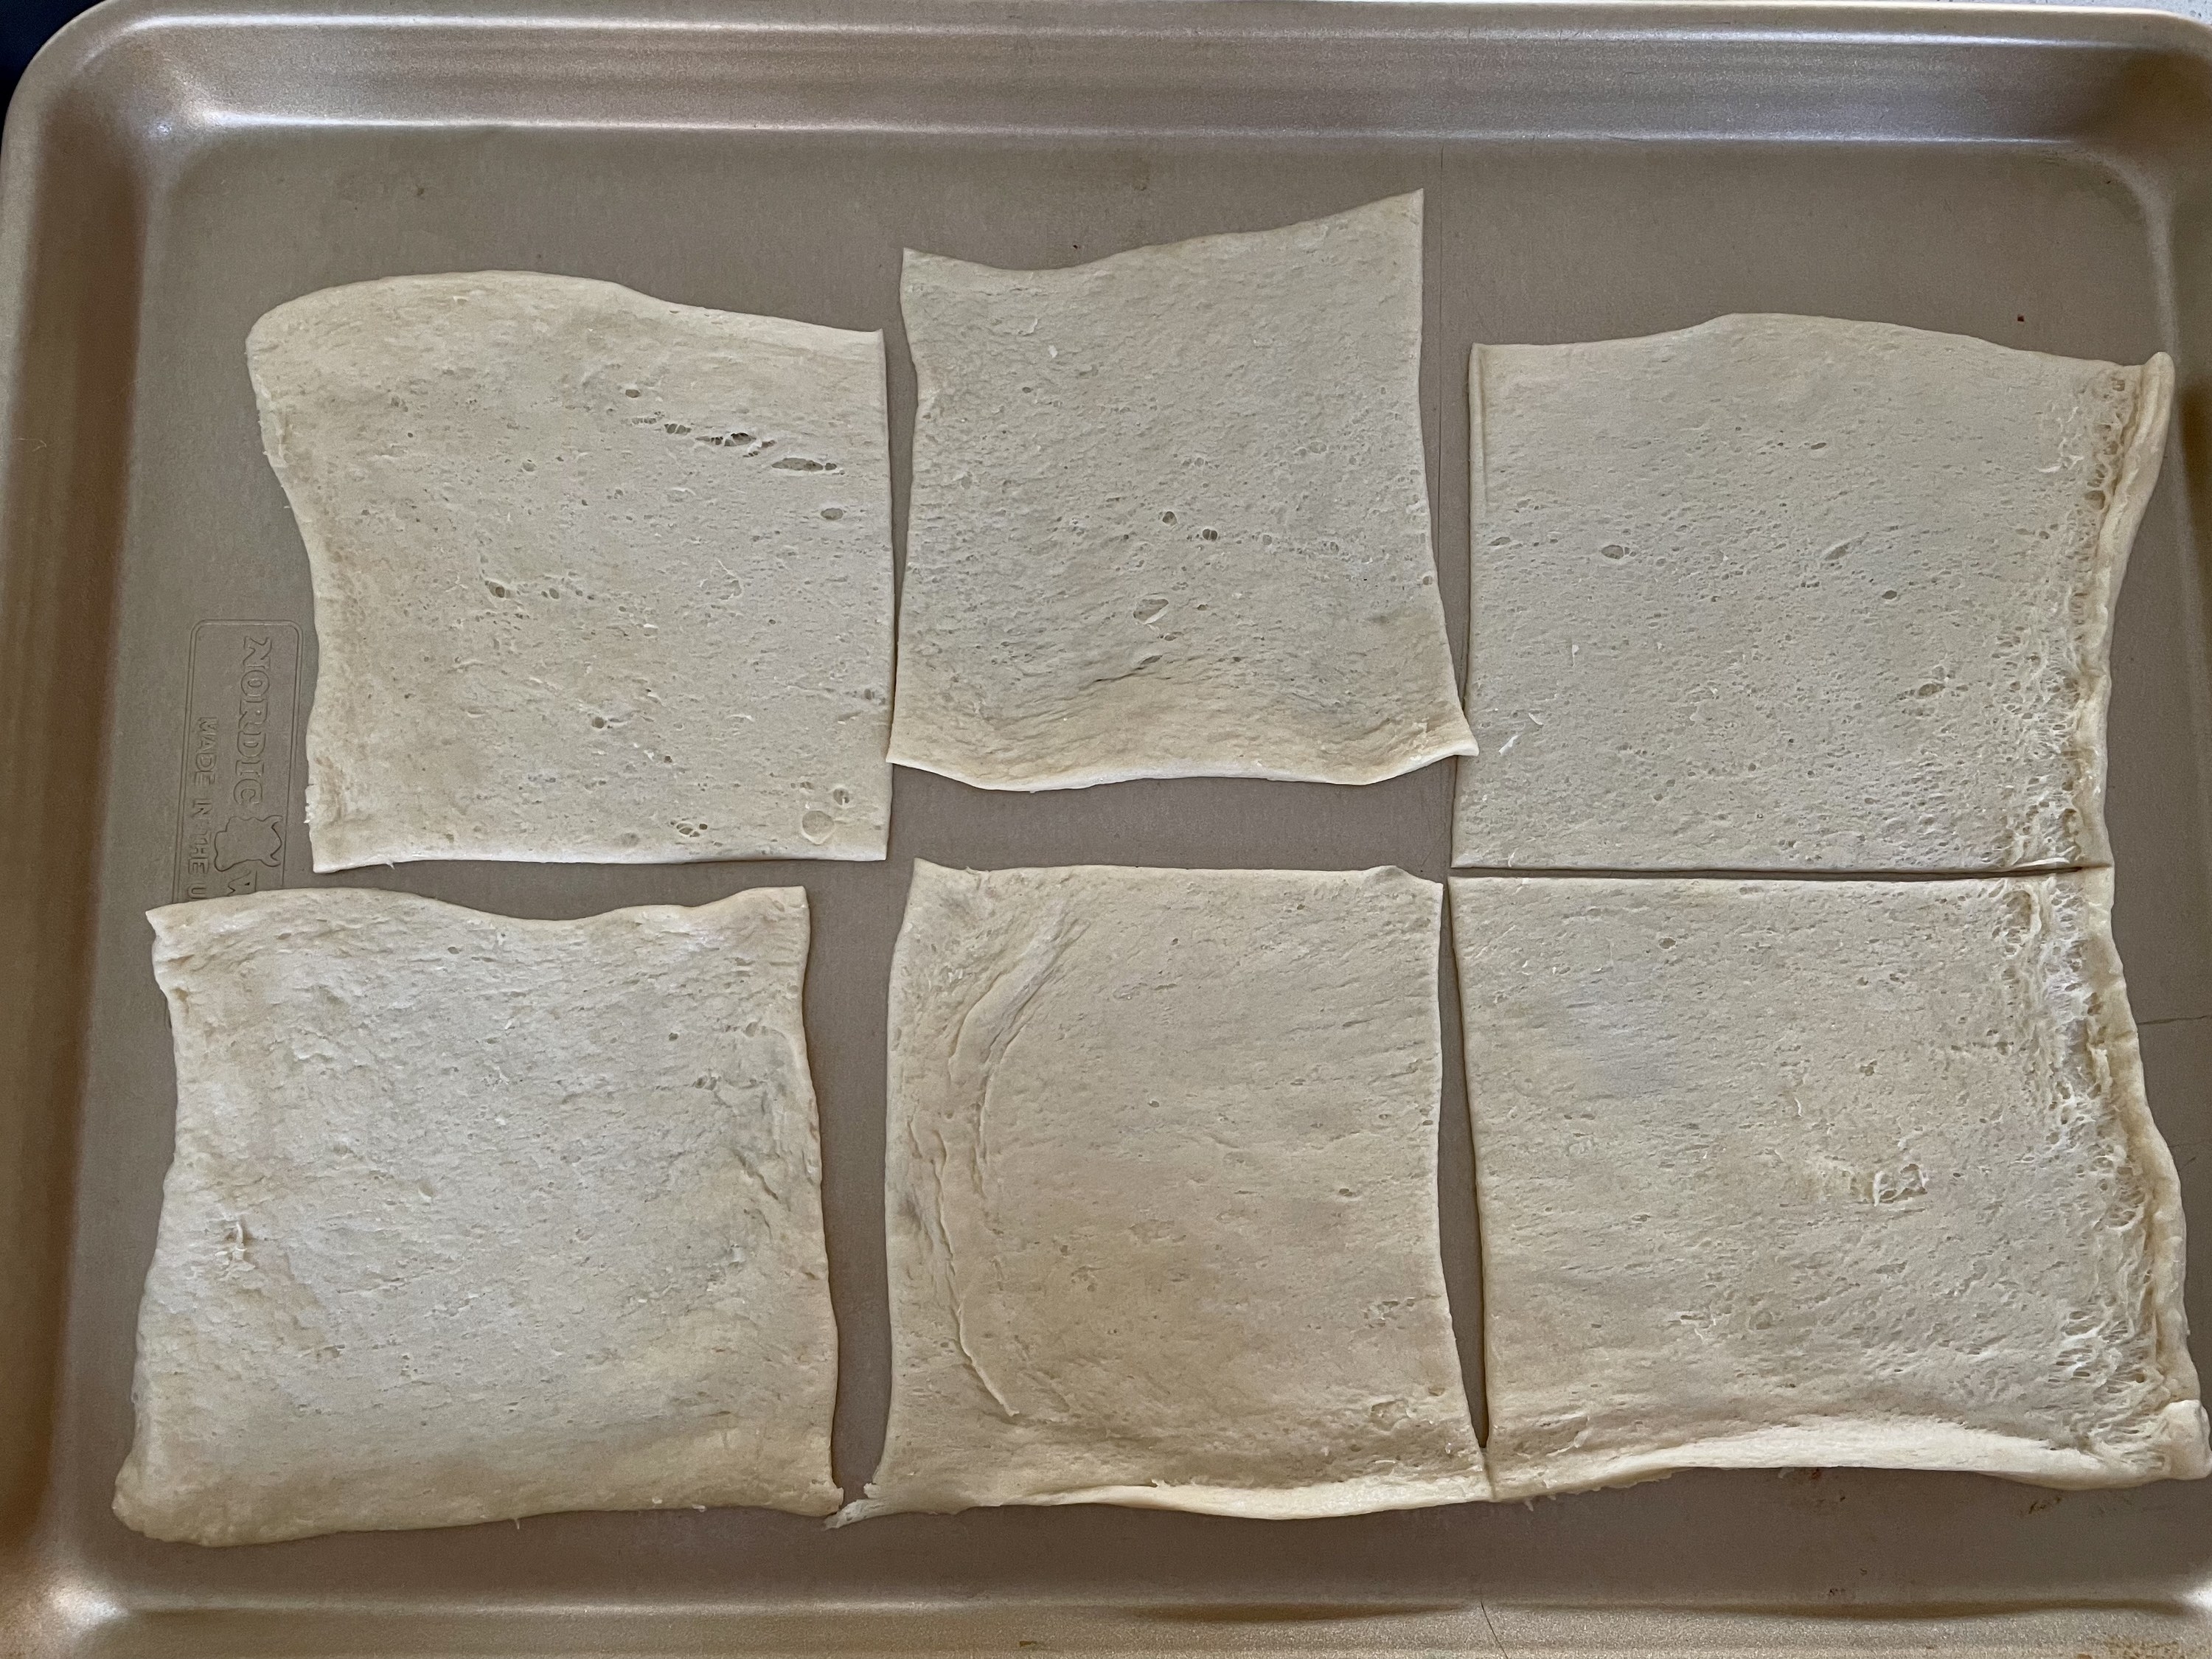 Puff pastry on a sheet pan